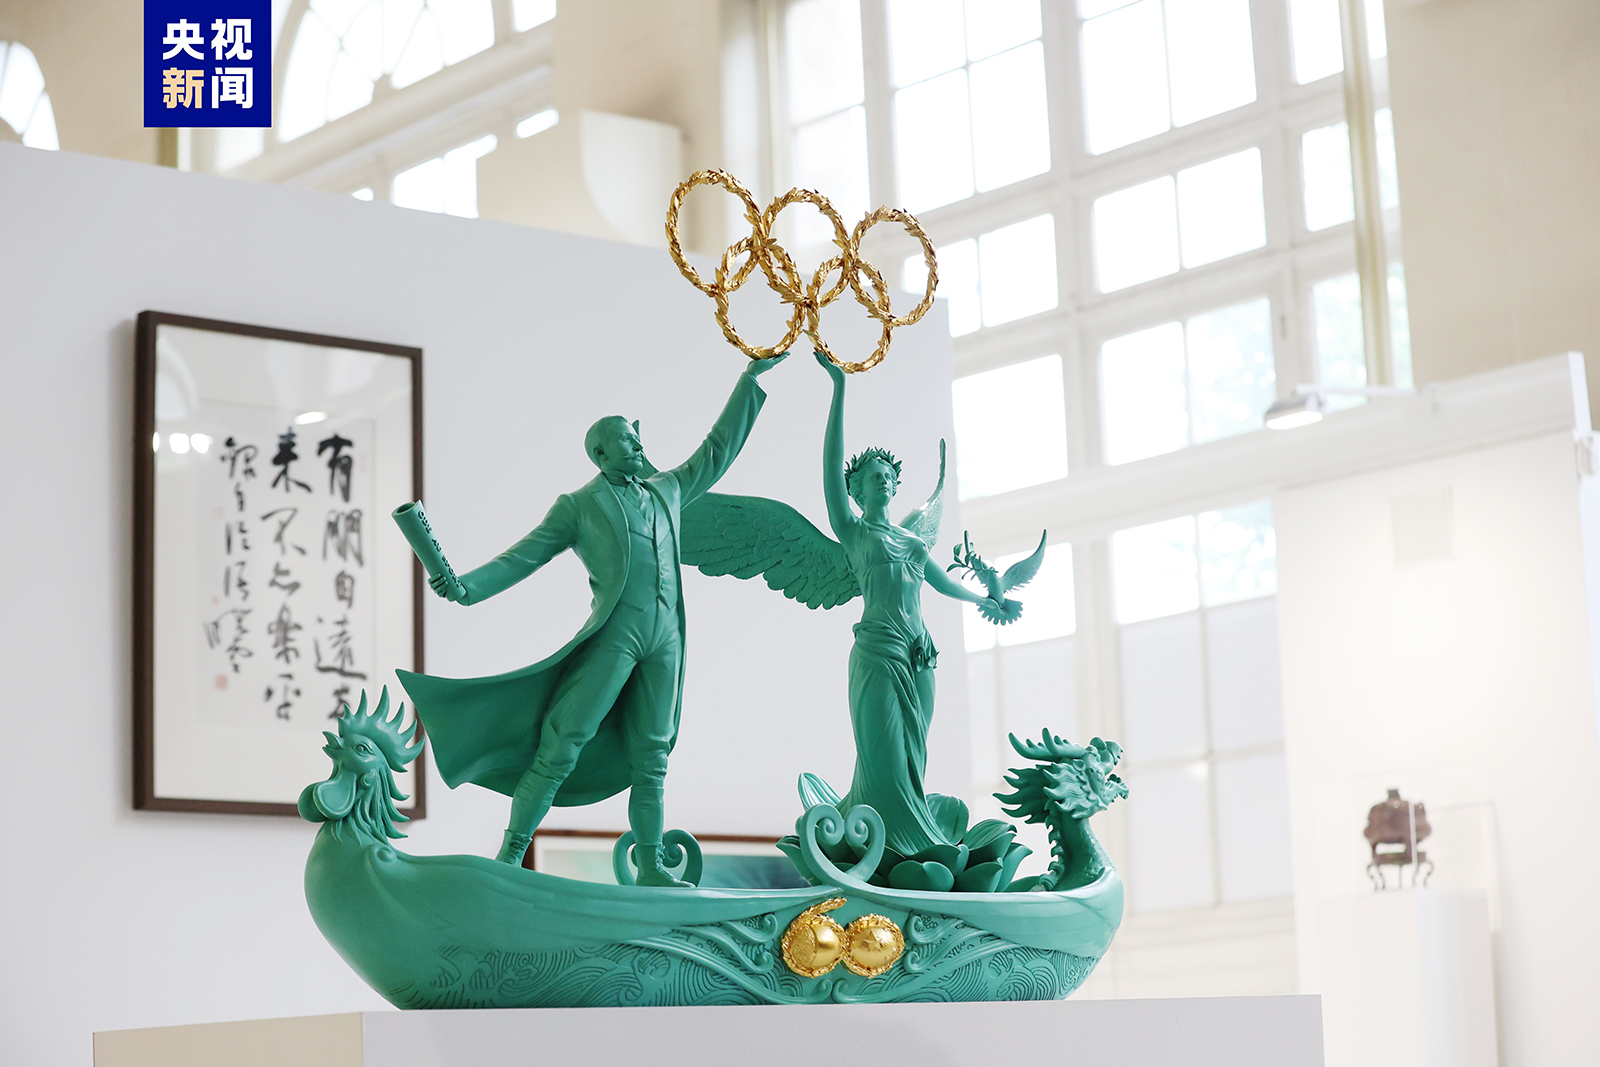 An Olympics-themed sculpture by Chinese artist Huang Jian will be on display at the 